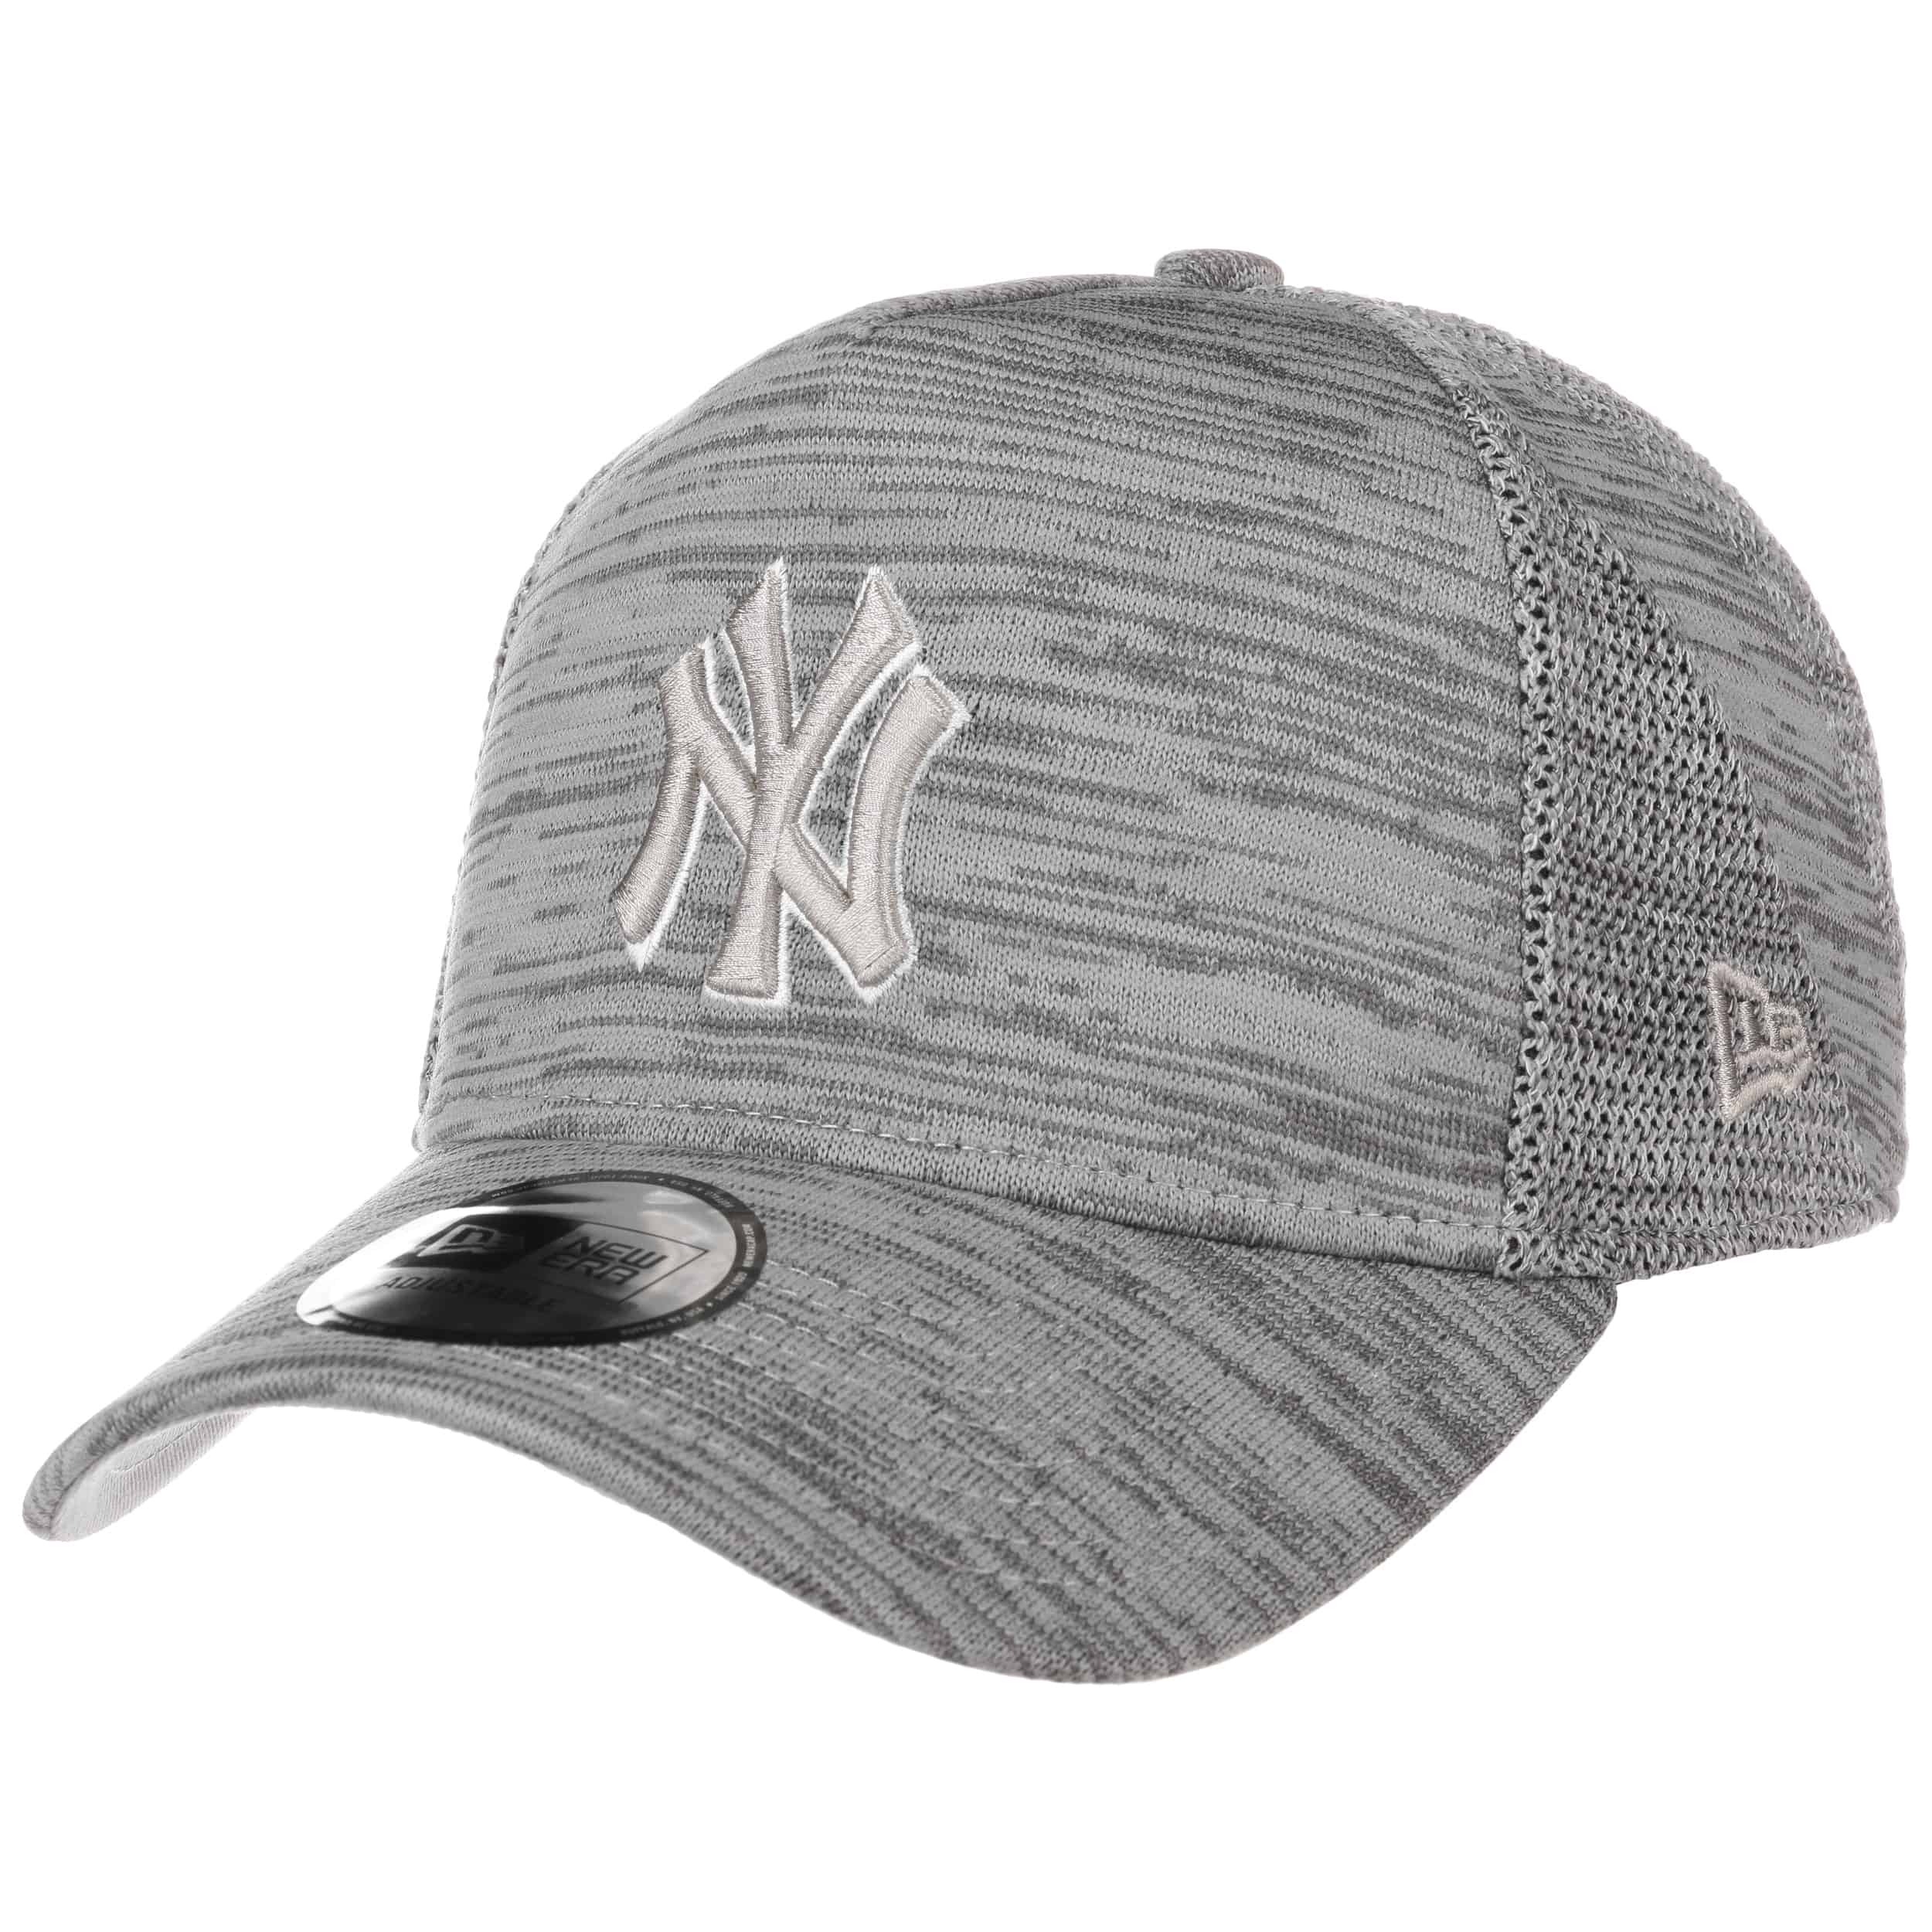 Official New Era New York Yankees Jersey Essential 9FORTY Cap A9400_282